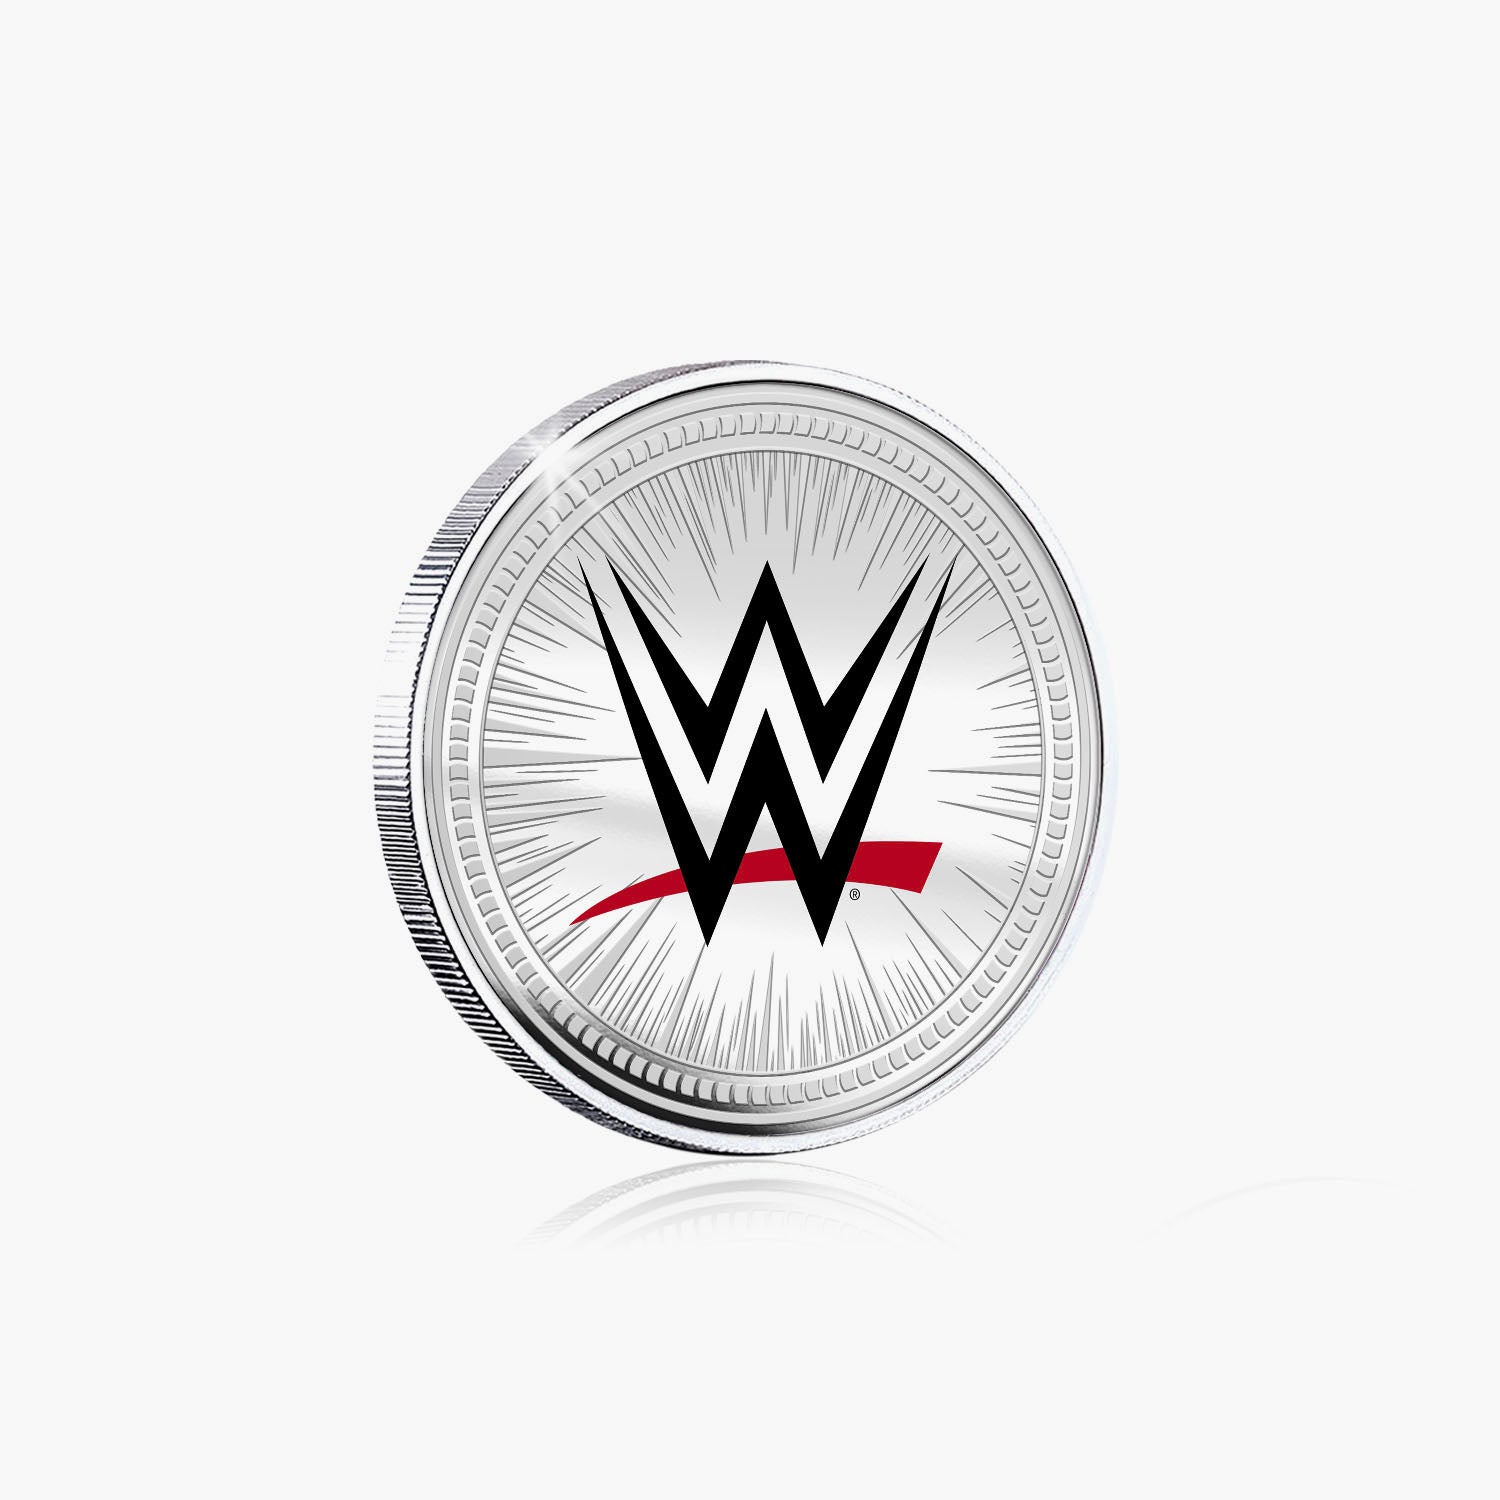 WWE Commemorative Collection - Bam Bam Bigelow - 32mm Silver Plated Commemorative